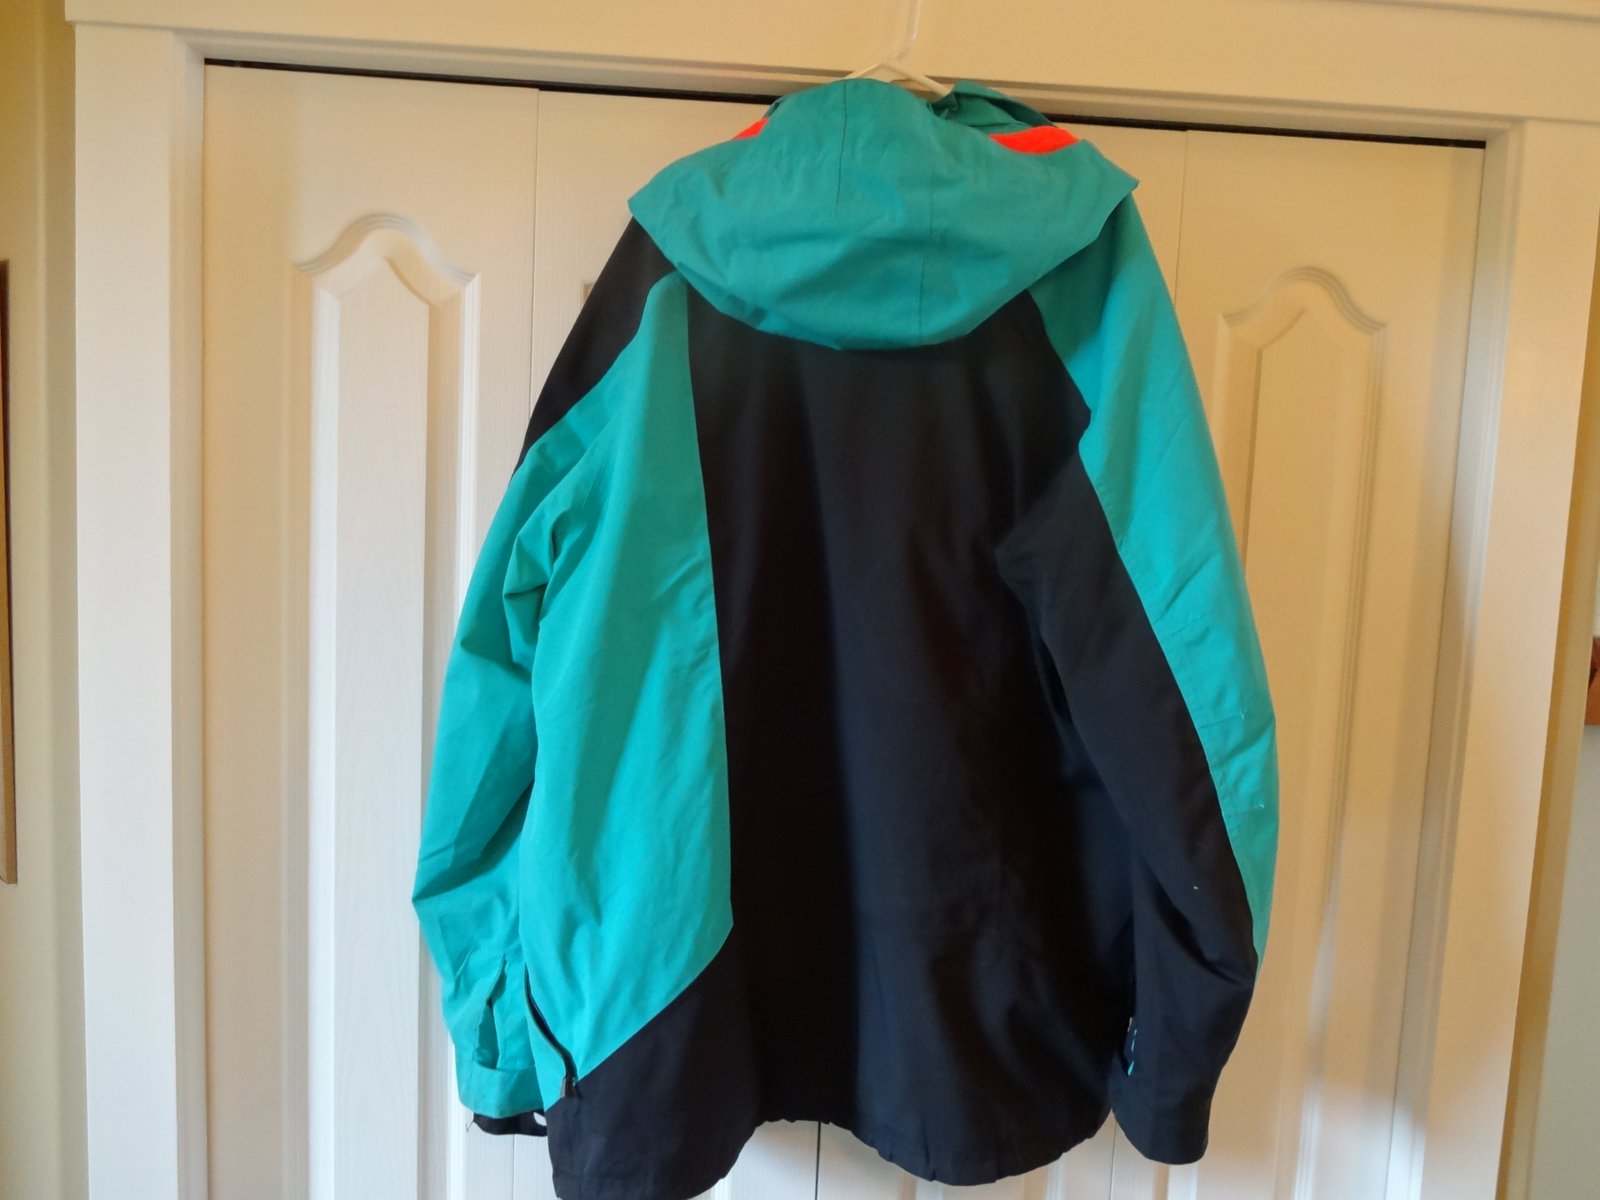 coat for sale